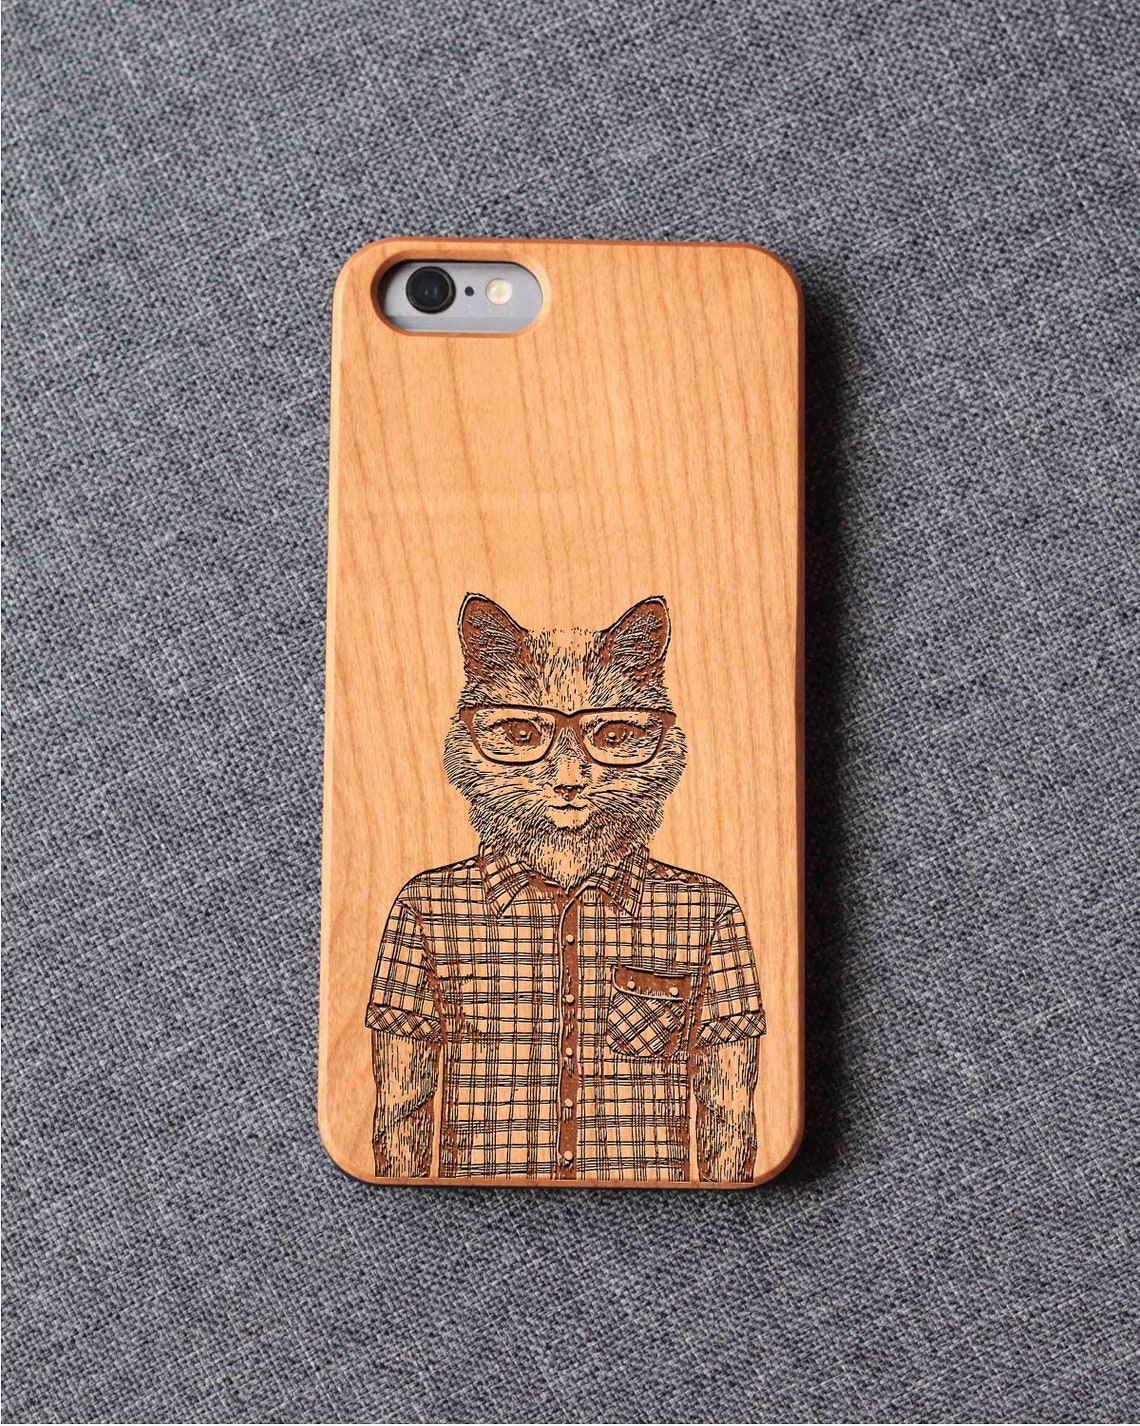 Shirted Cat Iphone Case For 13 Mini 11 X Wood Iphone Case Iphone 12 Wood Case Iphone 13 Pro Max, Iphone 12 Case